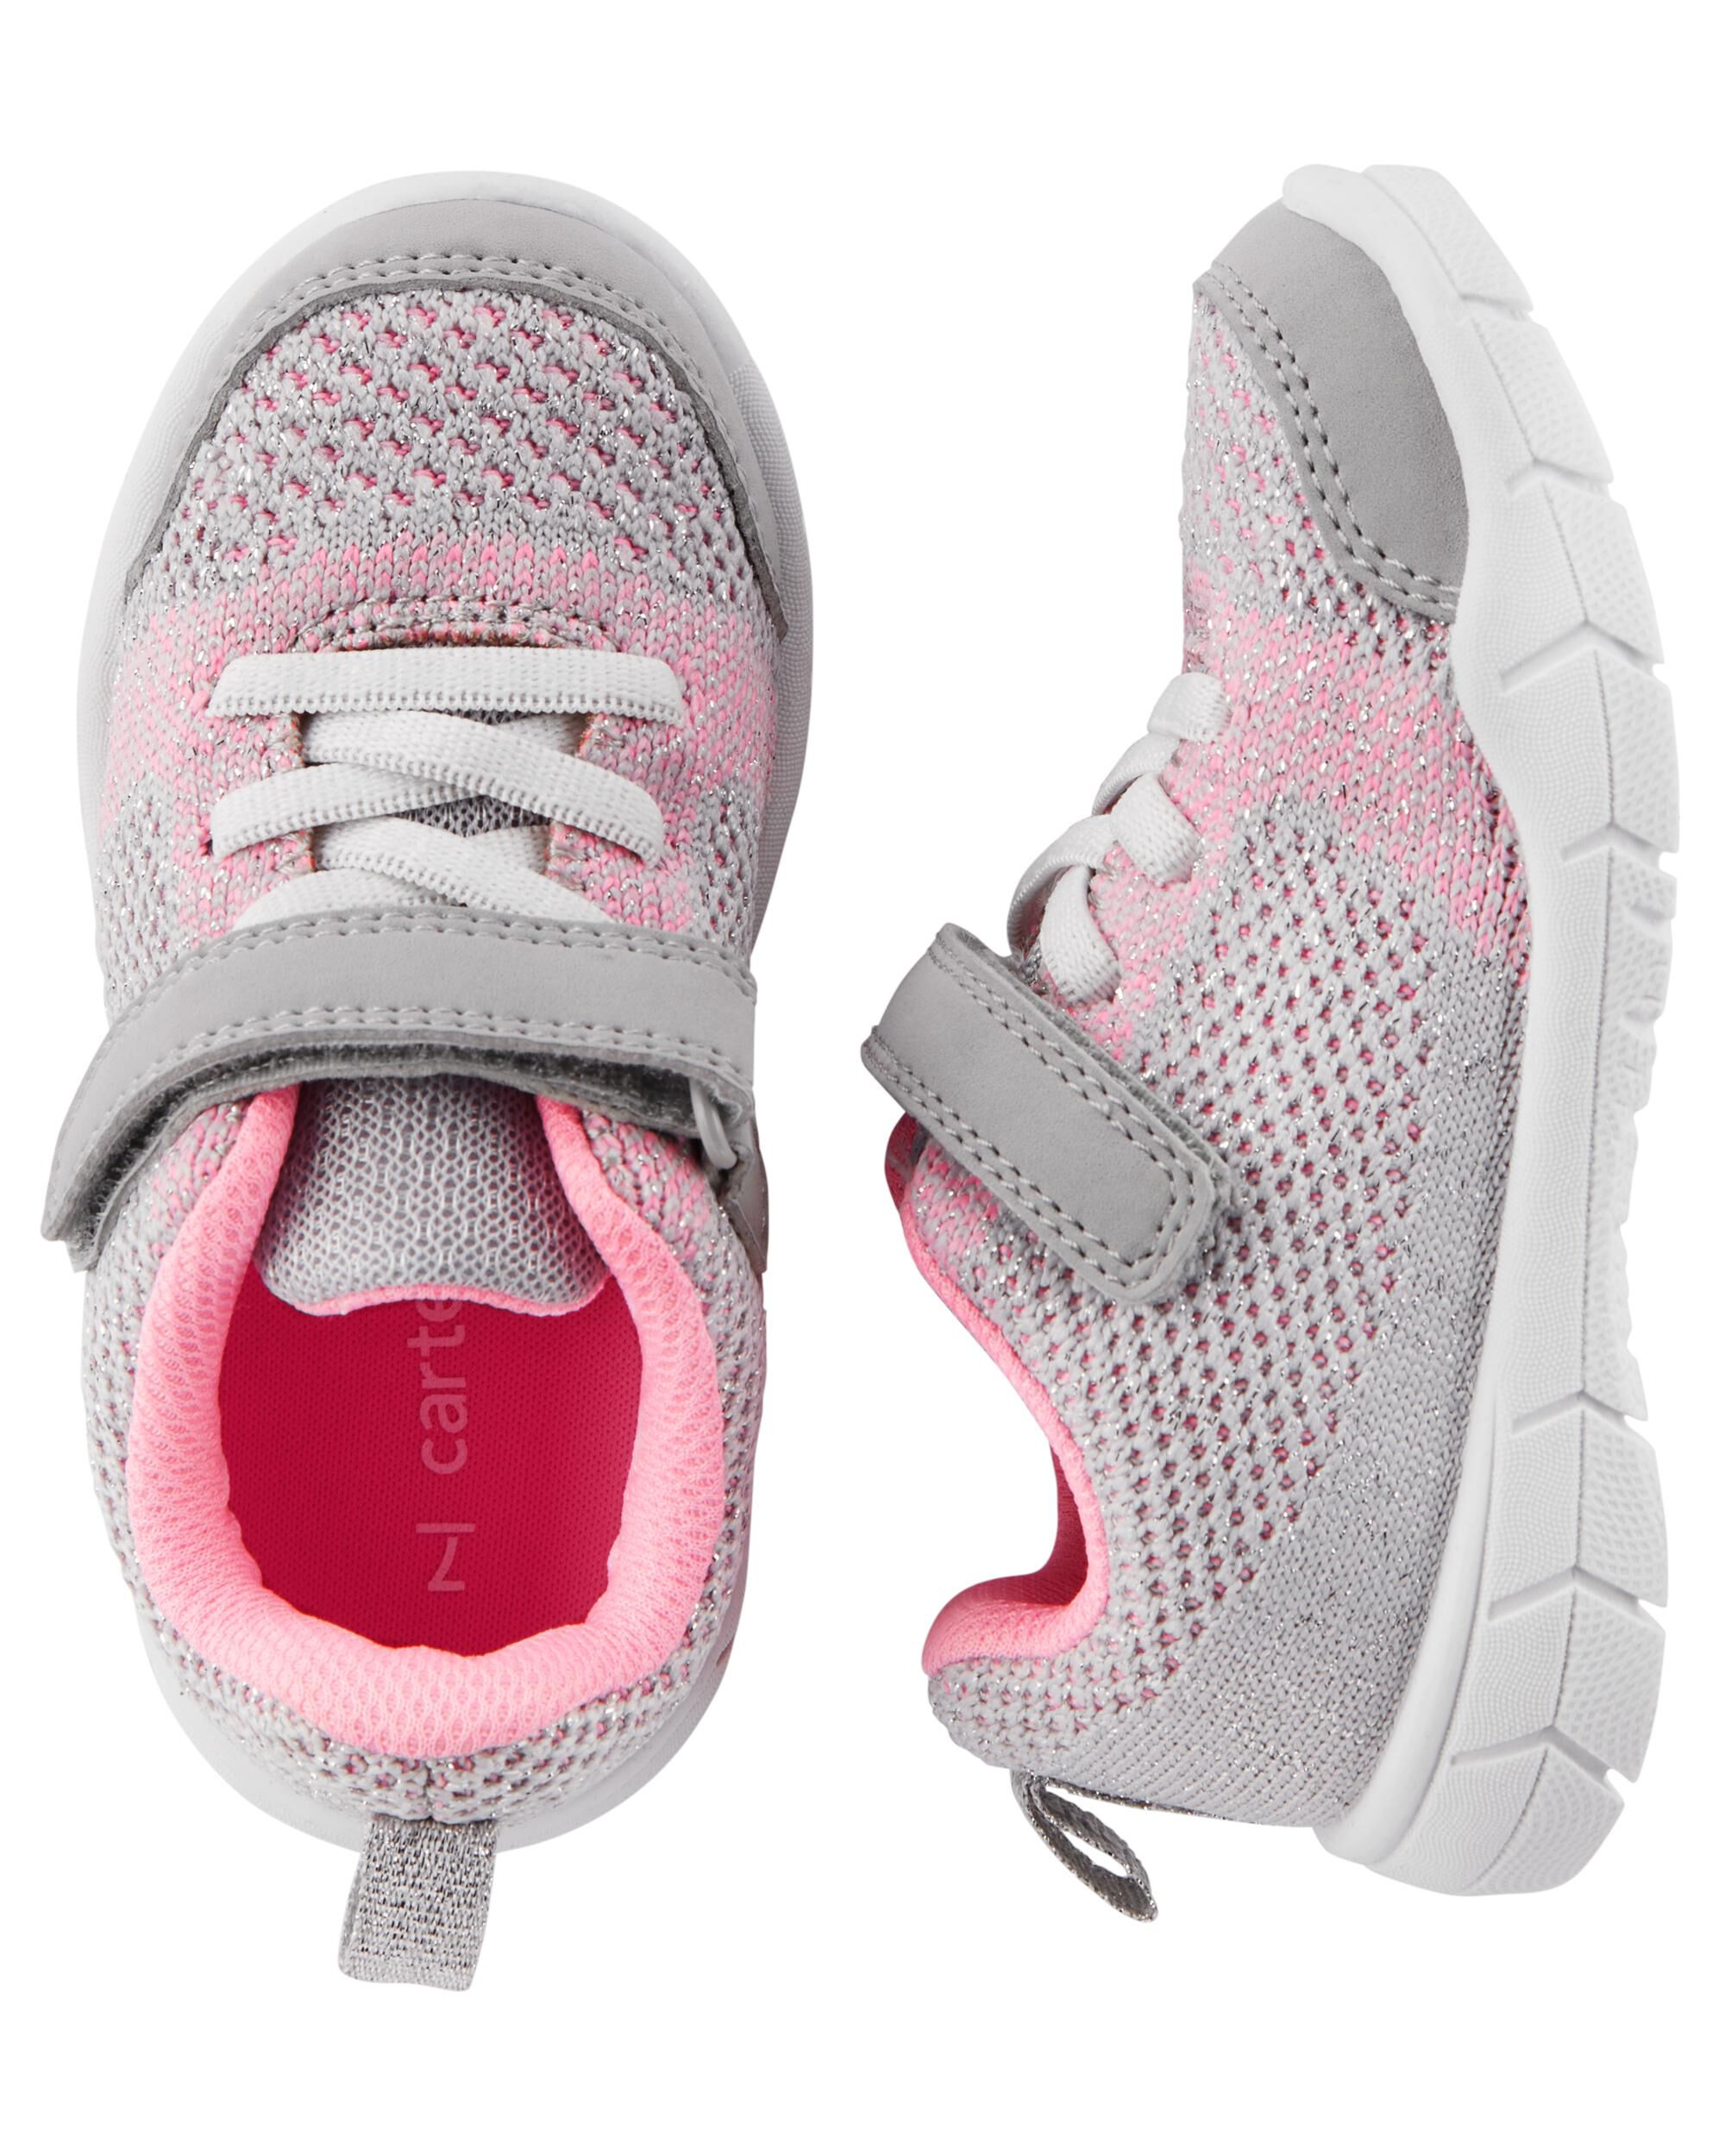 Carter's Athletic Sneakers | carters.com